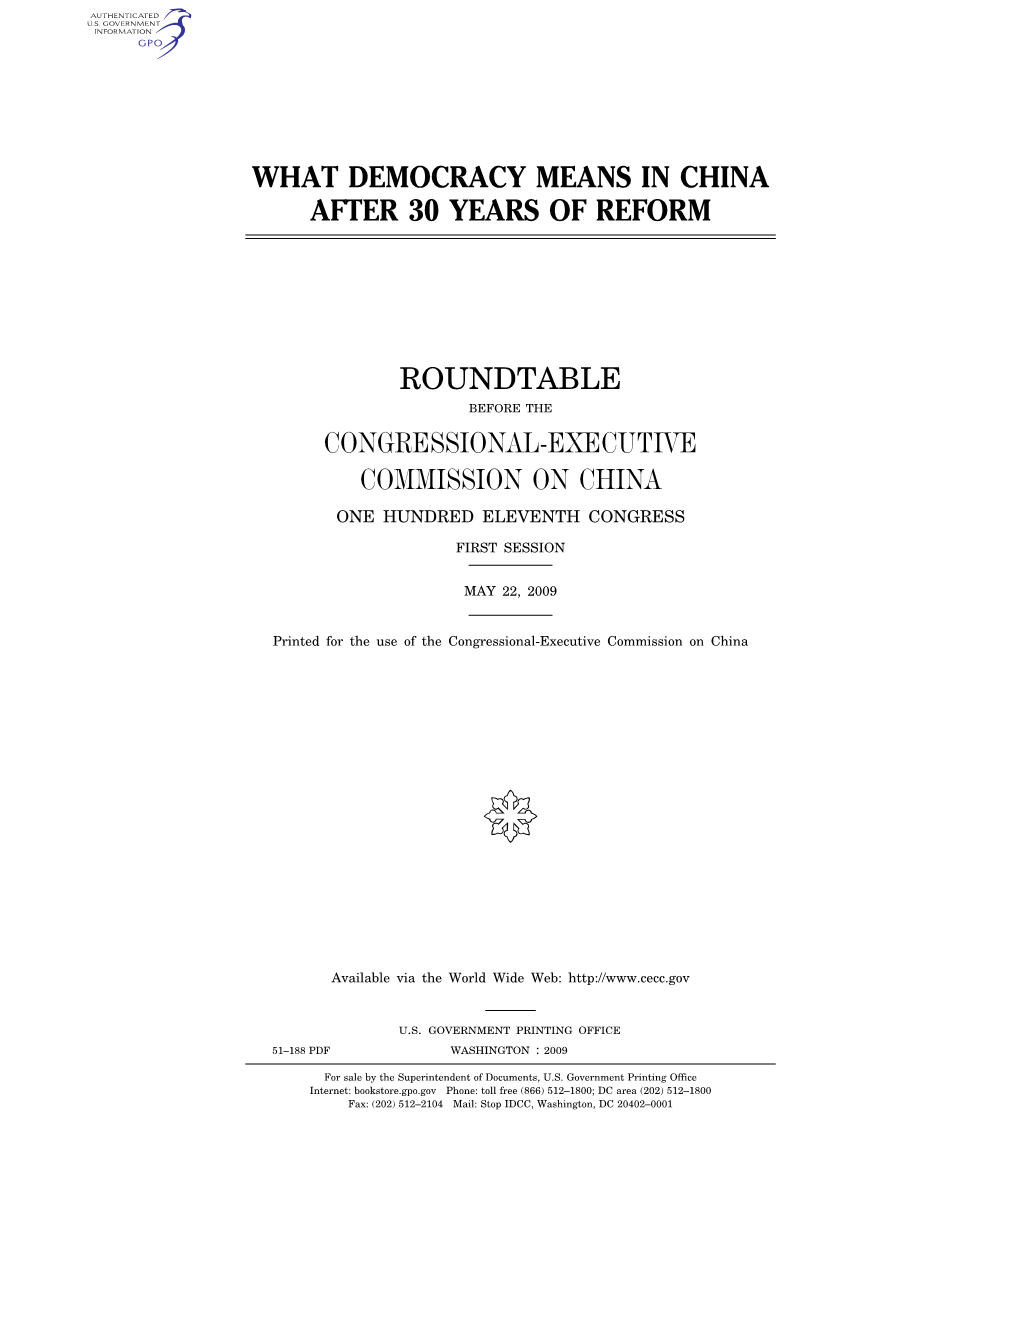 What Democracy Means in China After 30 Years of Reform Roundtable Congressional-Executive Commission on China